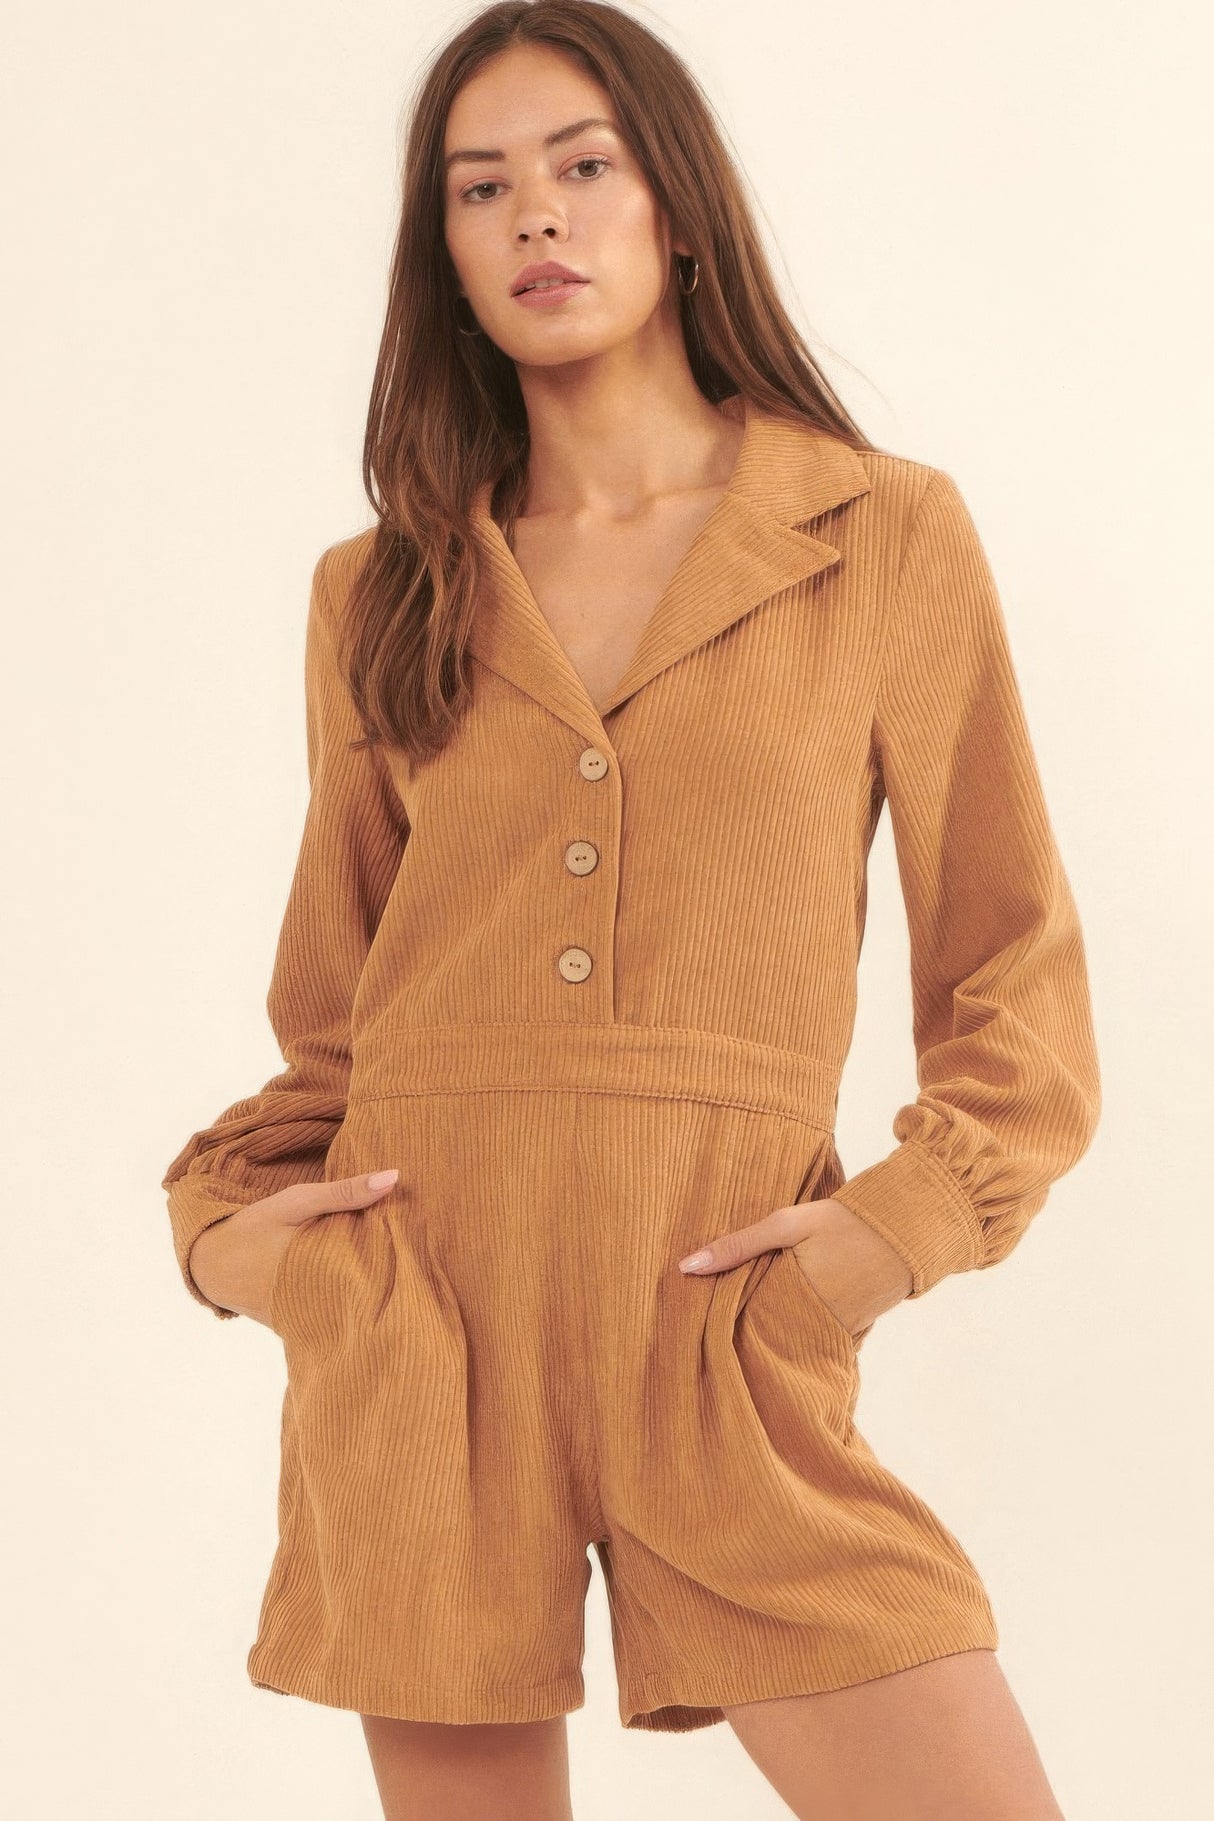 A Woven Corduroy Romper Taupe 